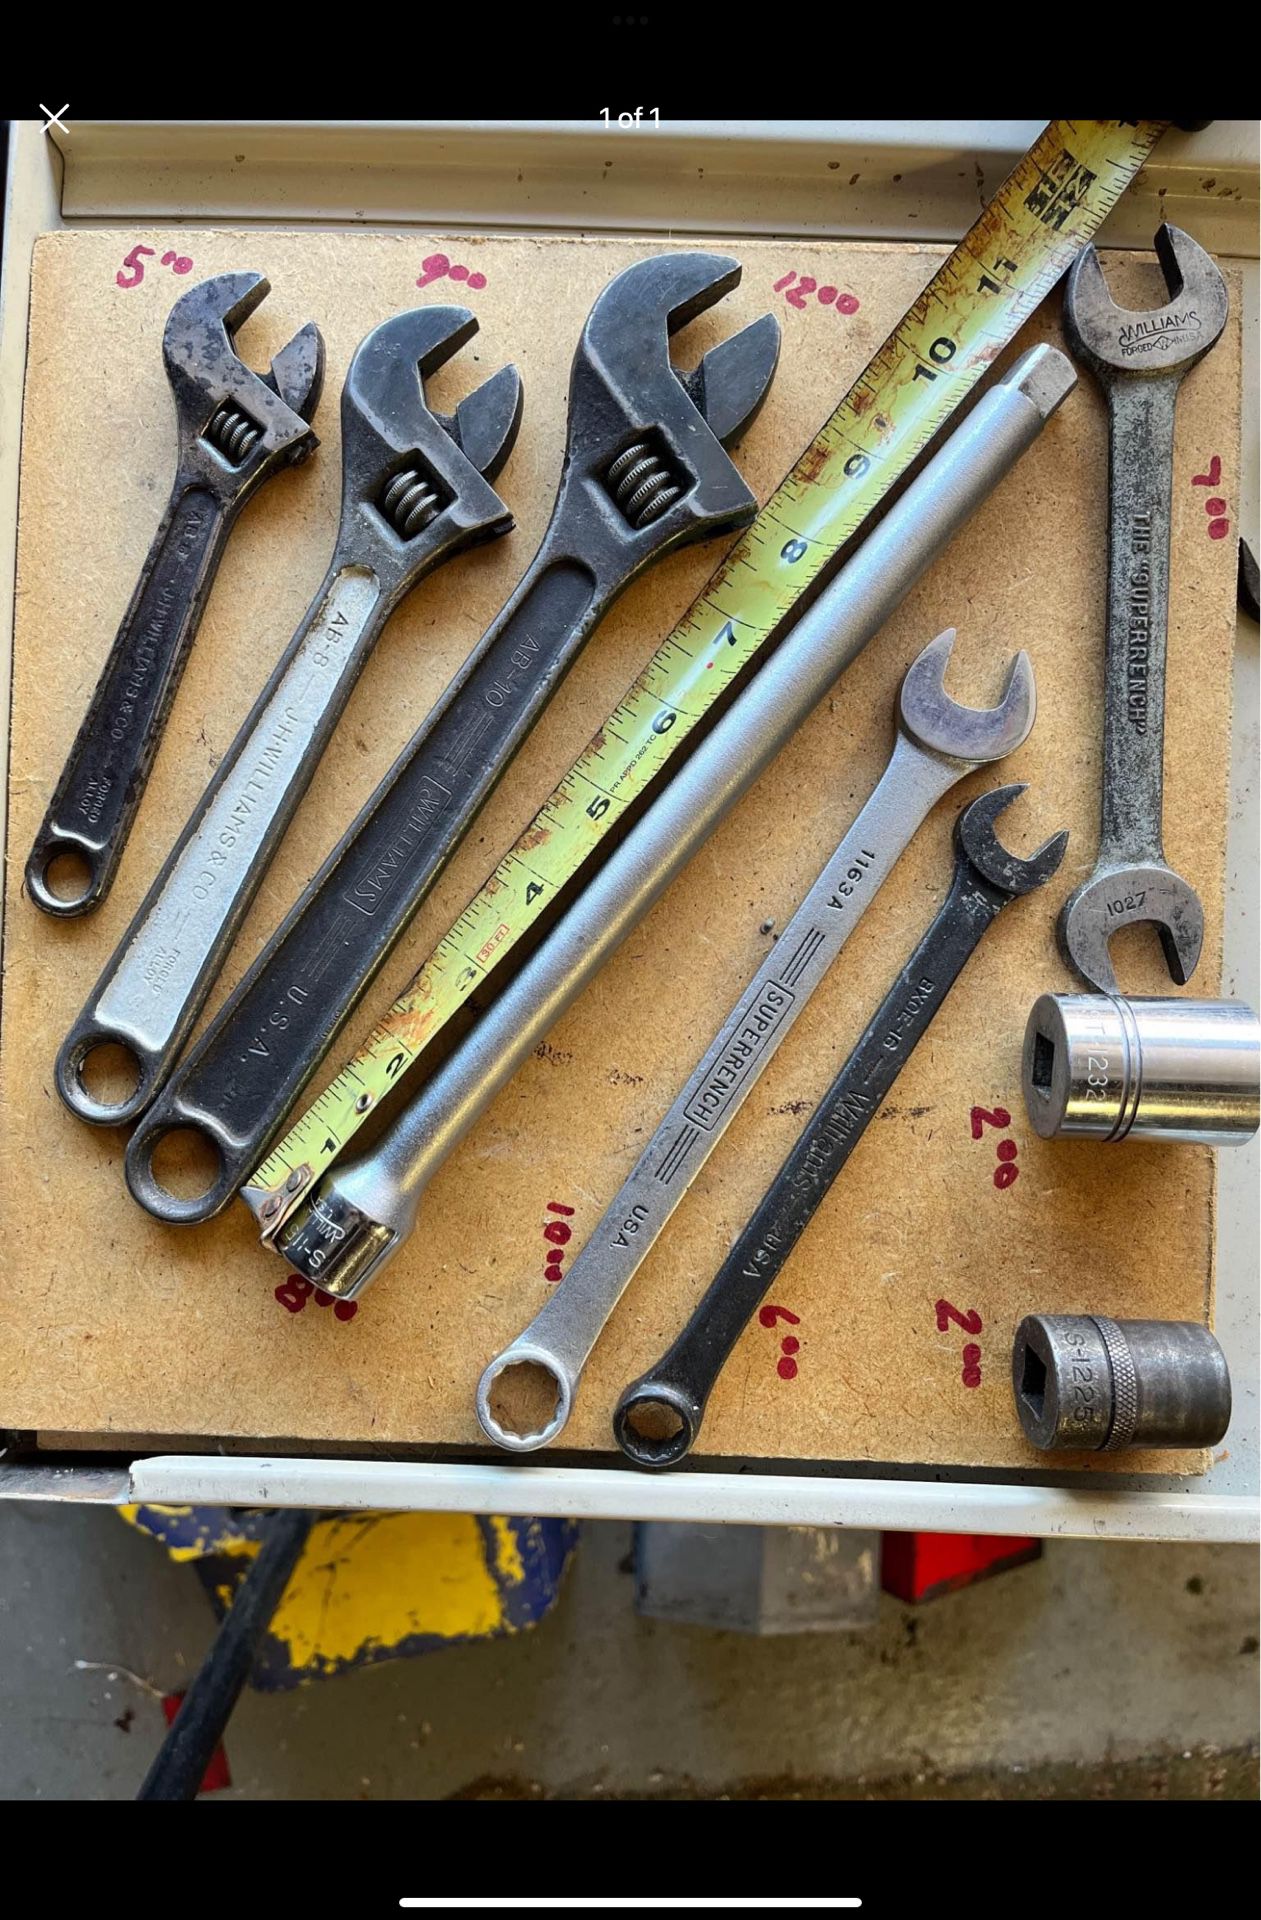 Vintage Williams “superjustable”wrenches 45$ For All